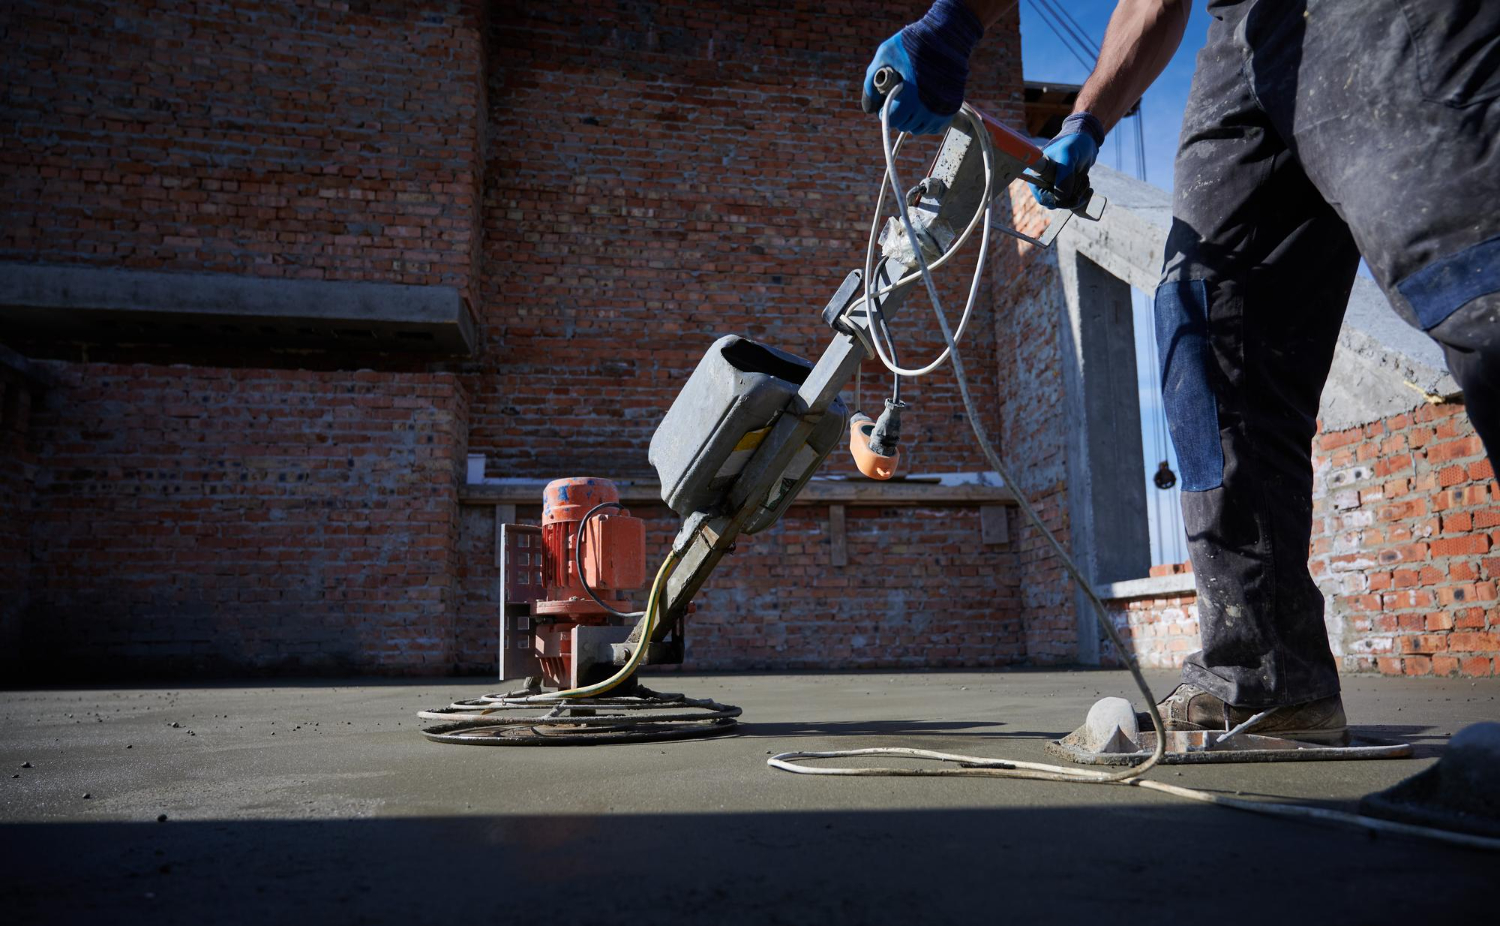 How Did Concrete Grinding Polishing Services Evolve From the Time It Existed